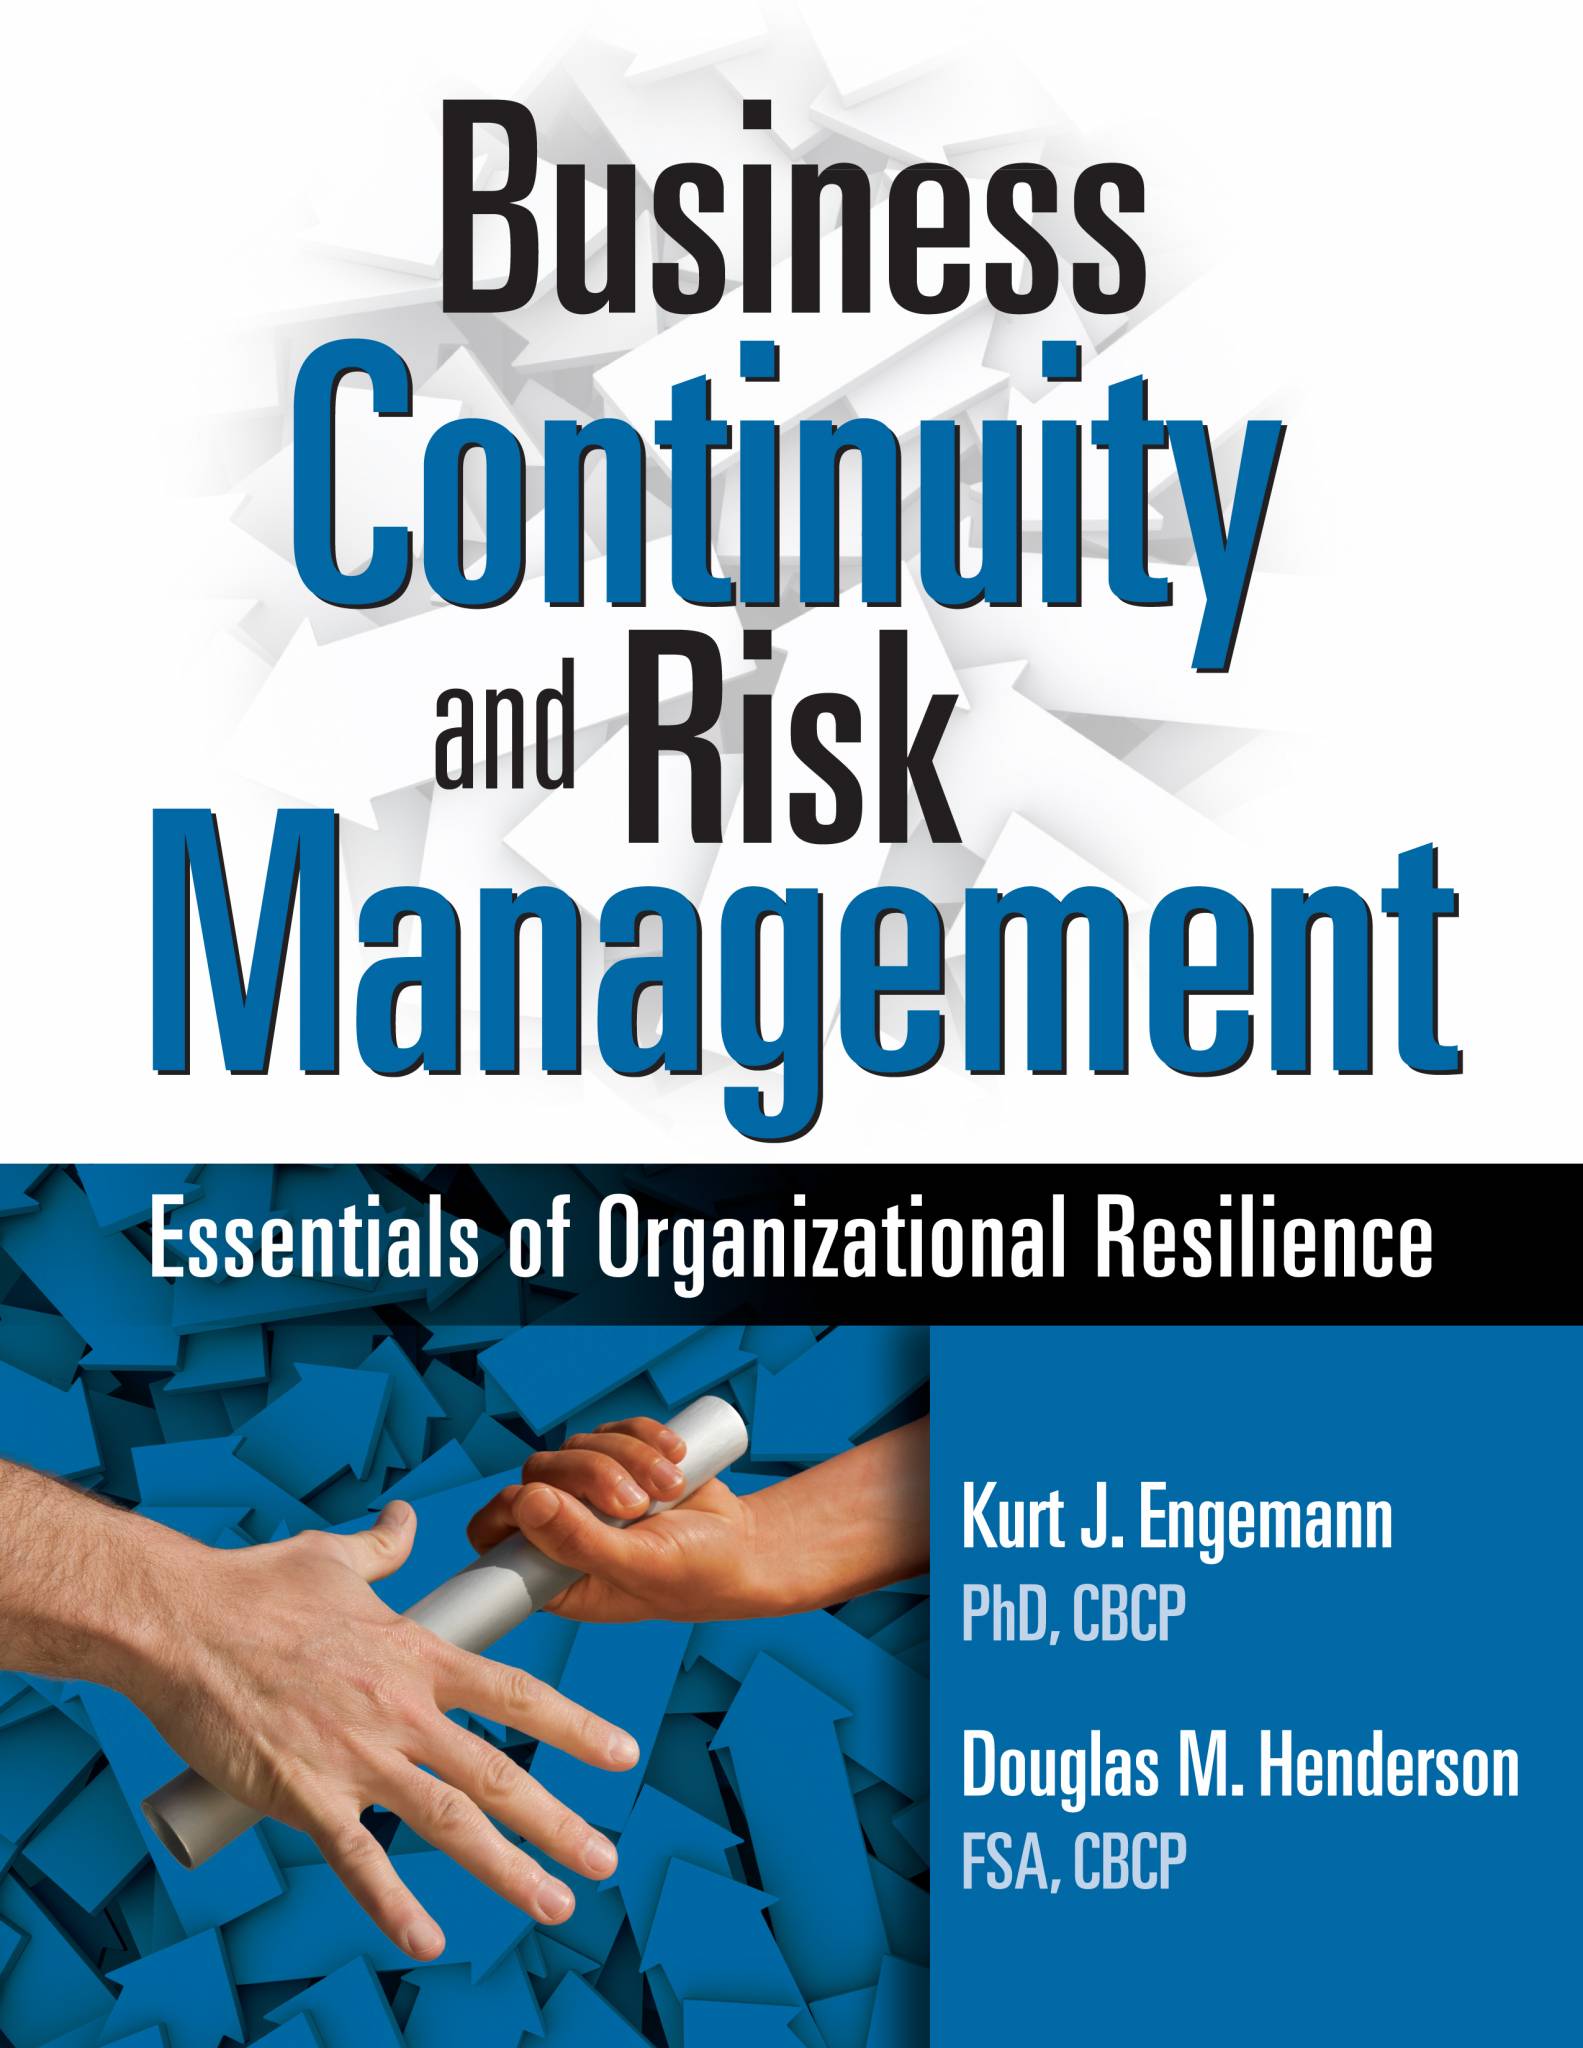 business-continuity-risk-management-organizational-resilience-textbook-rothstein-publishing